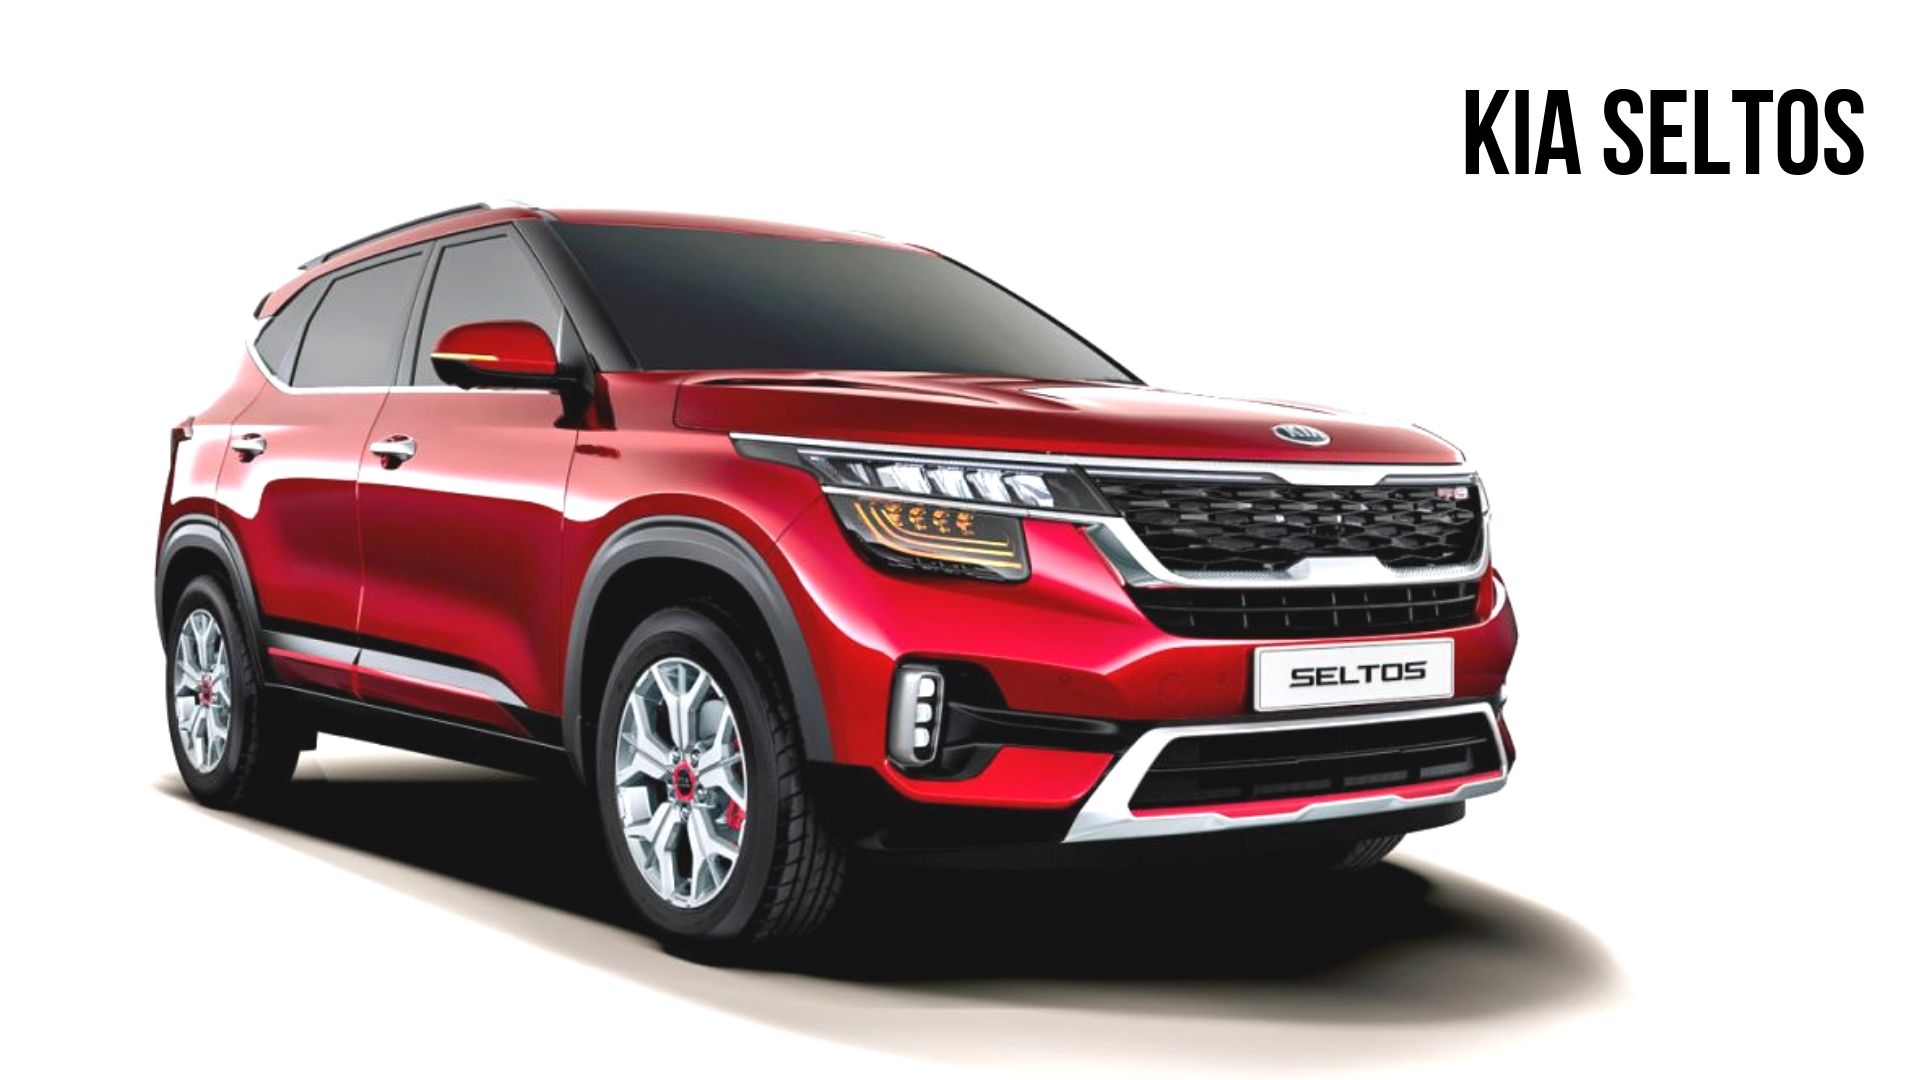 Kia Seltos Launched In South Korea, Priced From Rs. 11.35 Lakh ($16.7K)